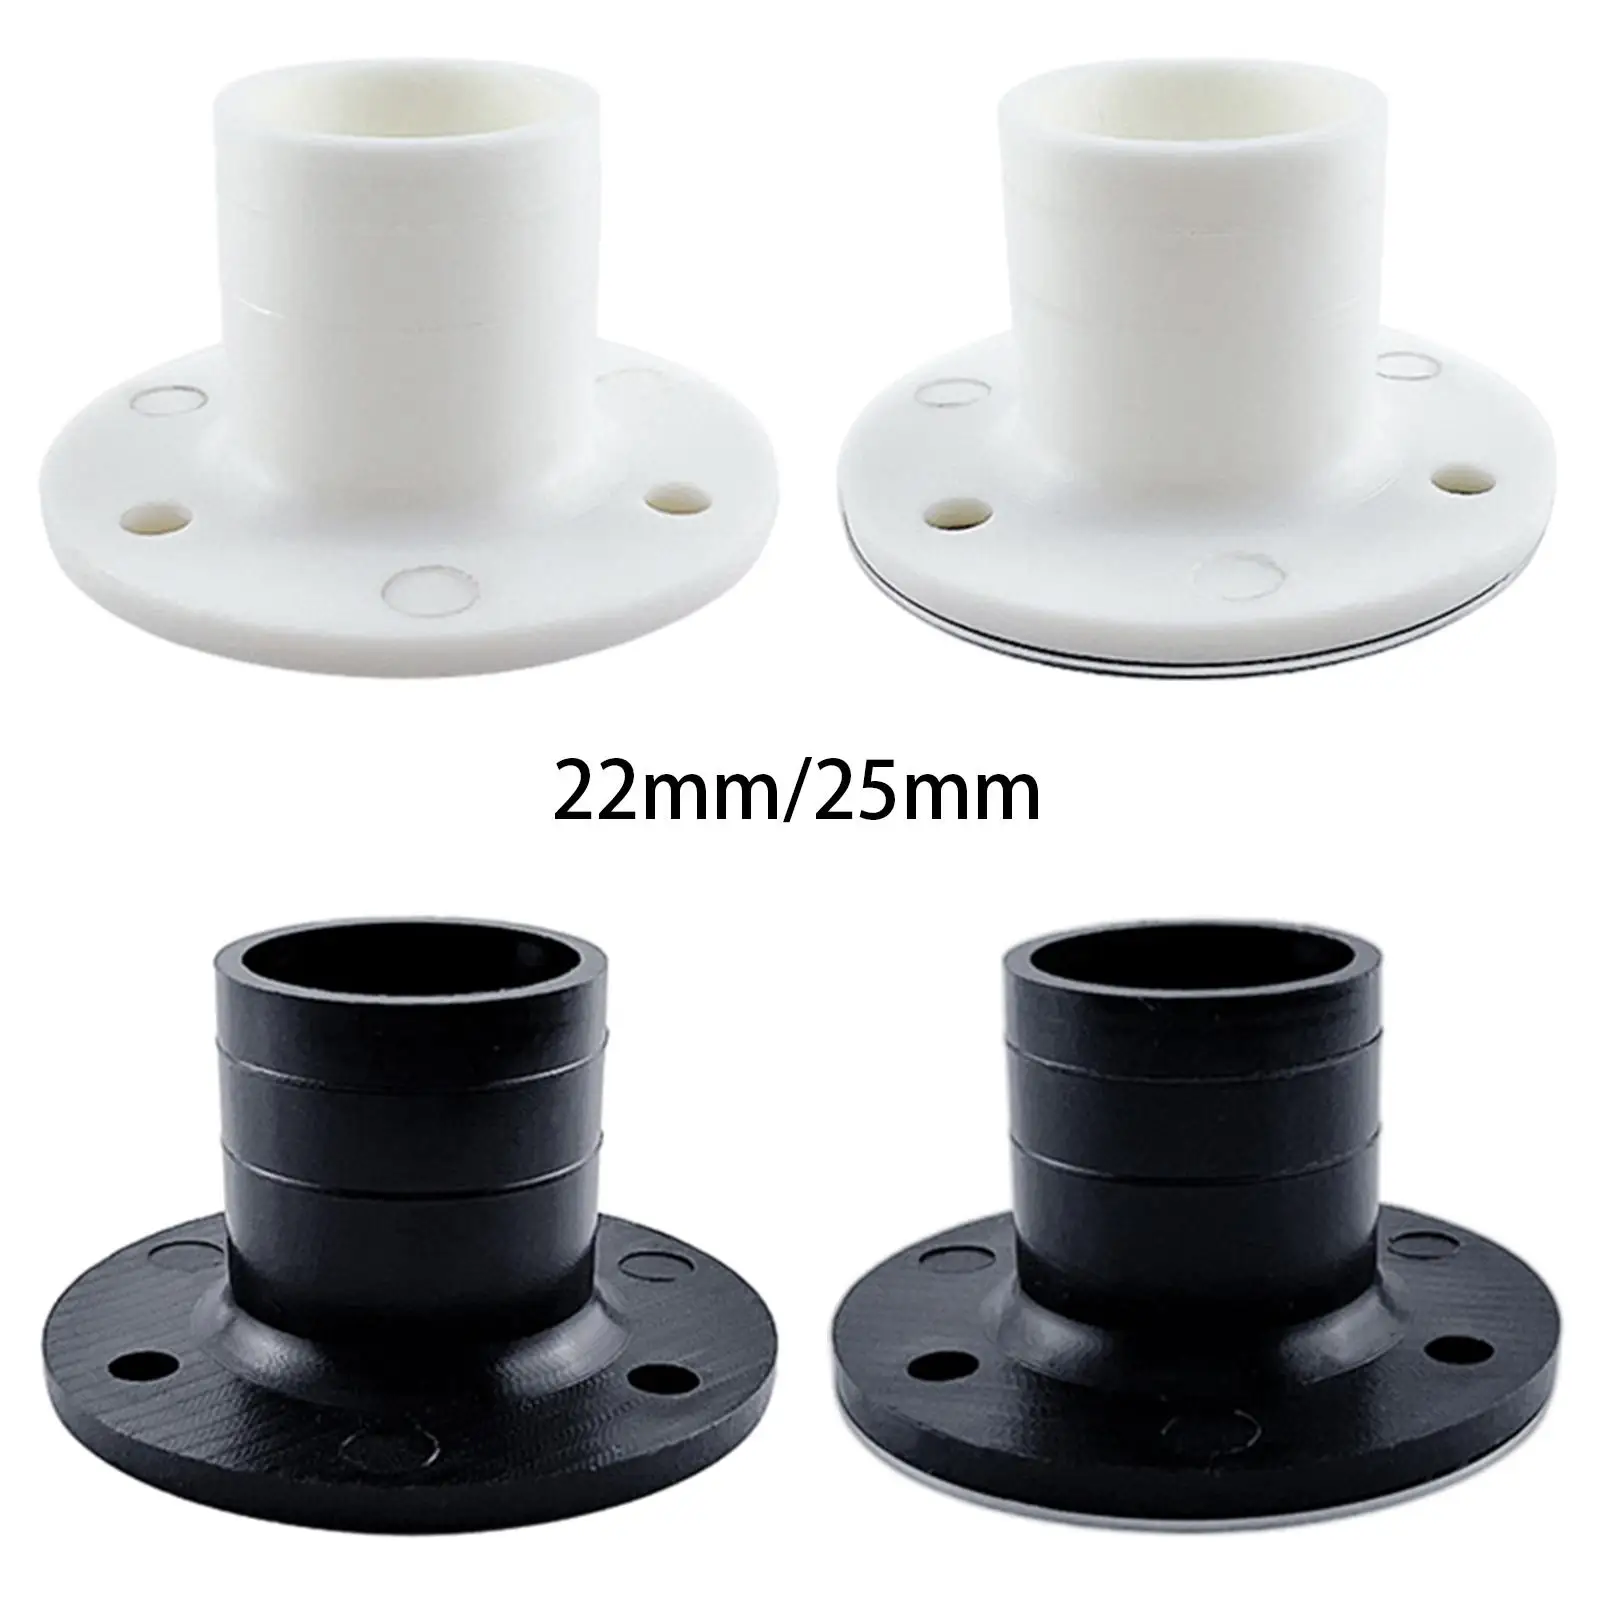 

Compact Boat Floor Deck Drain Nylon 316 Stainless Steel Scupper for Boat Yacht Kayak Bathroom Toilet with Screws Supplies